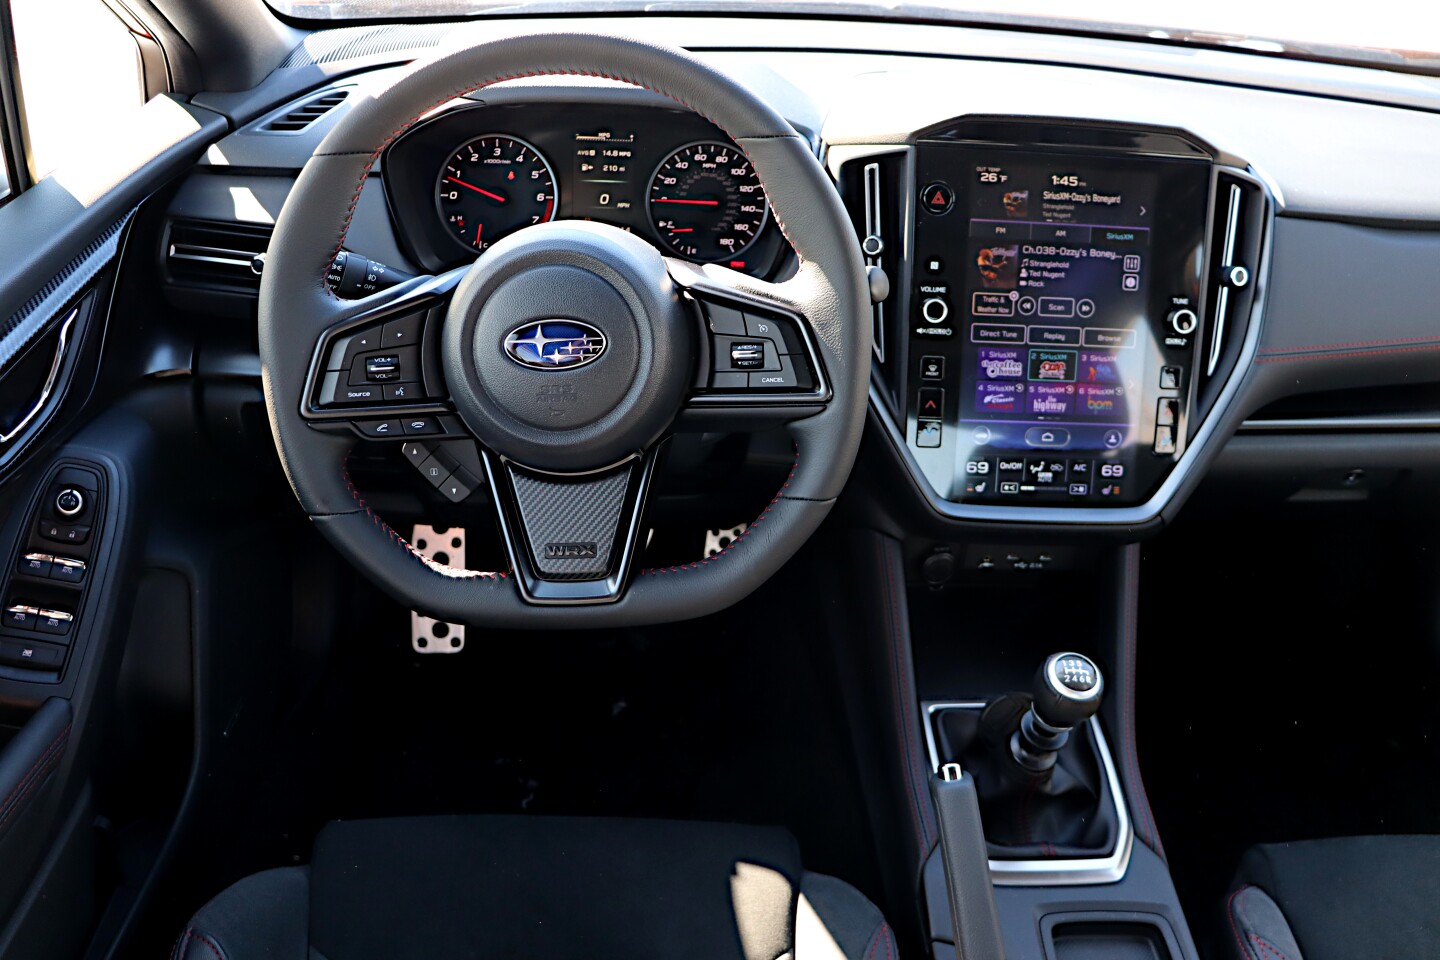 We were highly impressed with the easy-to-read instrument cluster and wonderful shifting in the 2022 Subaru WRX